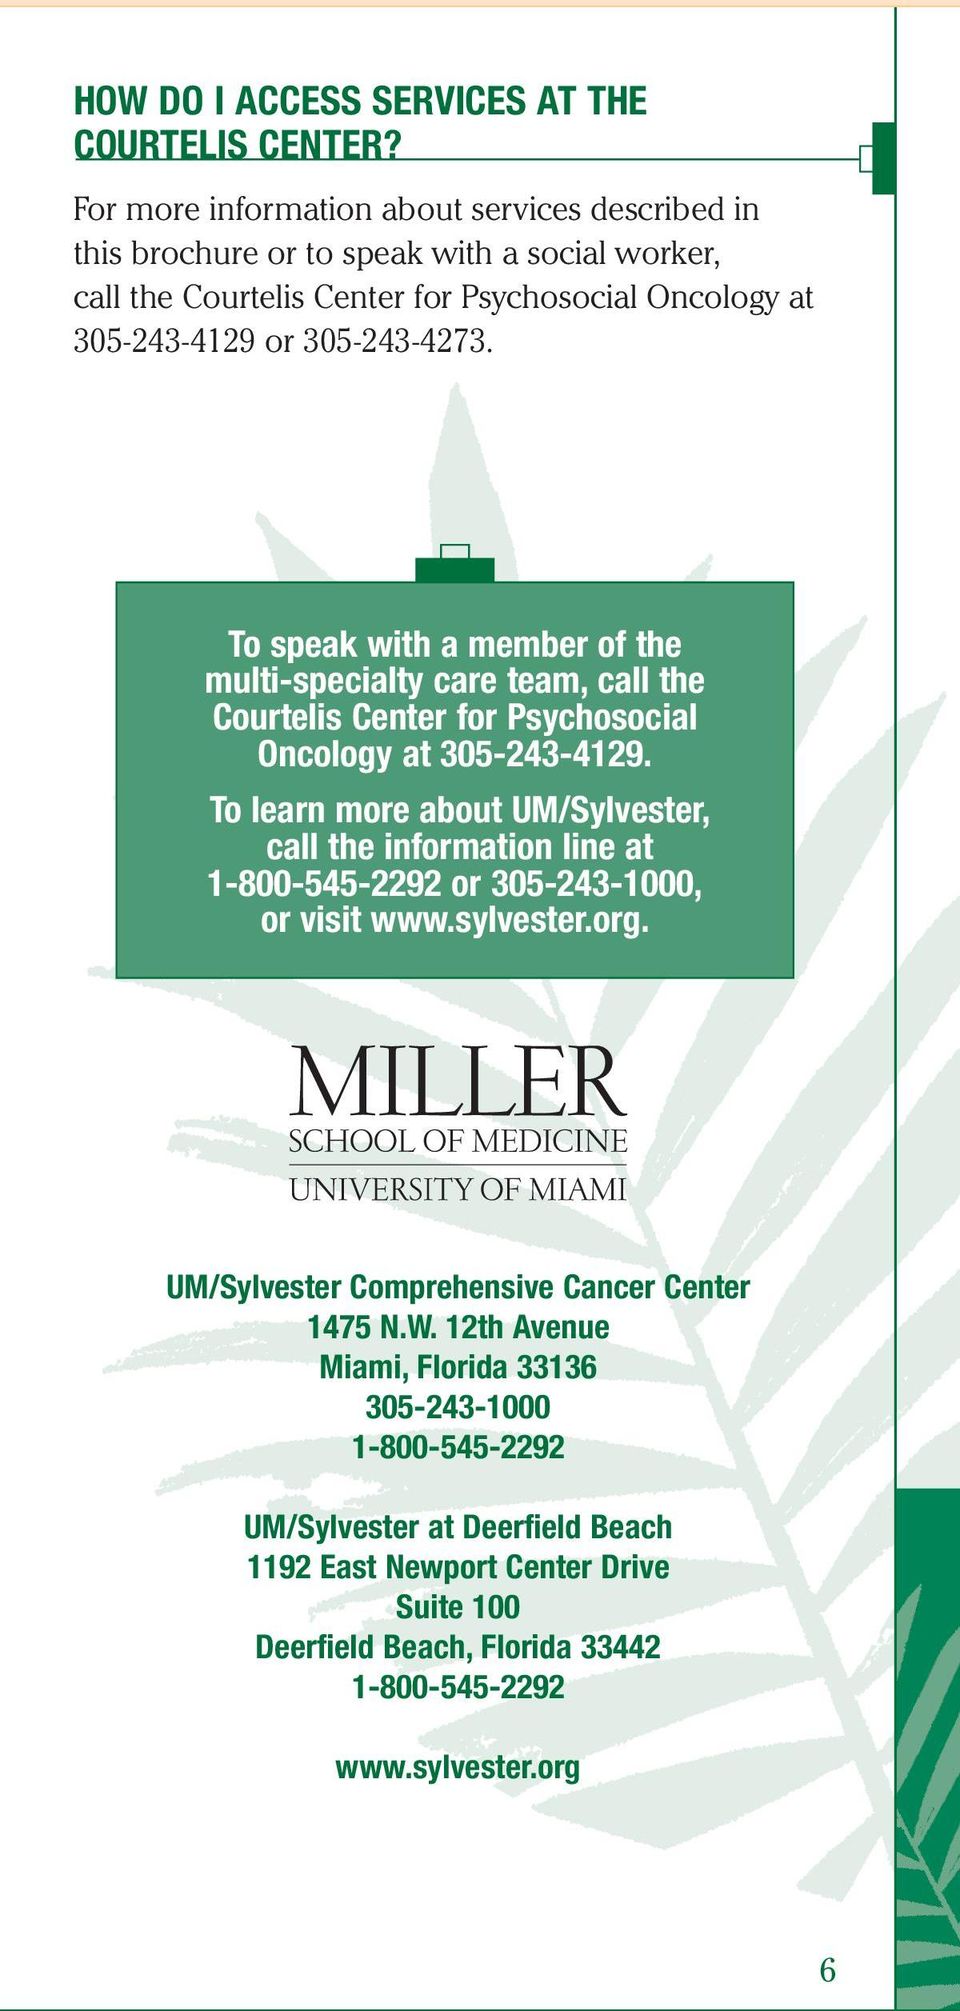 To speak with a member of the multi-specialty care team, call the Courtelis Center for Psychosocial Oncology at 305-243-4129.